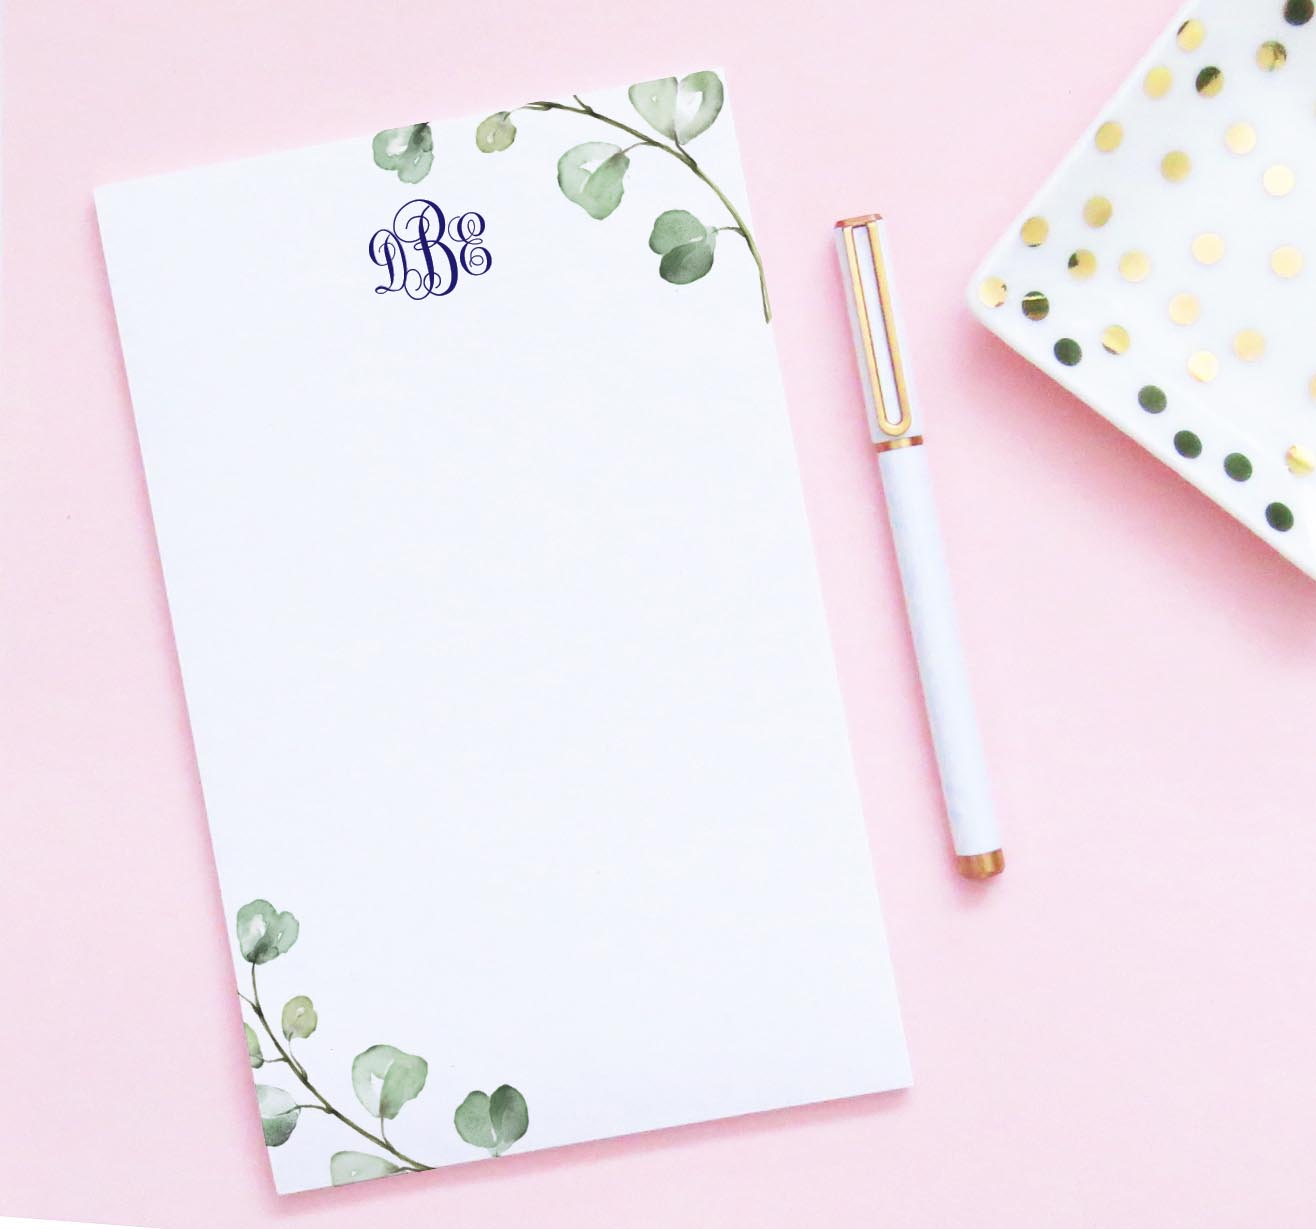 np278 Personalized Monogram Notepad with Eucalyptus Leaves greenery 3 letter